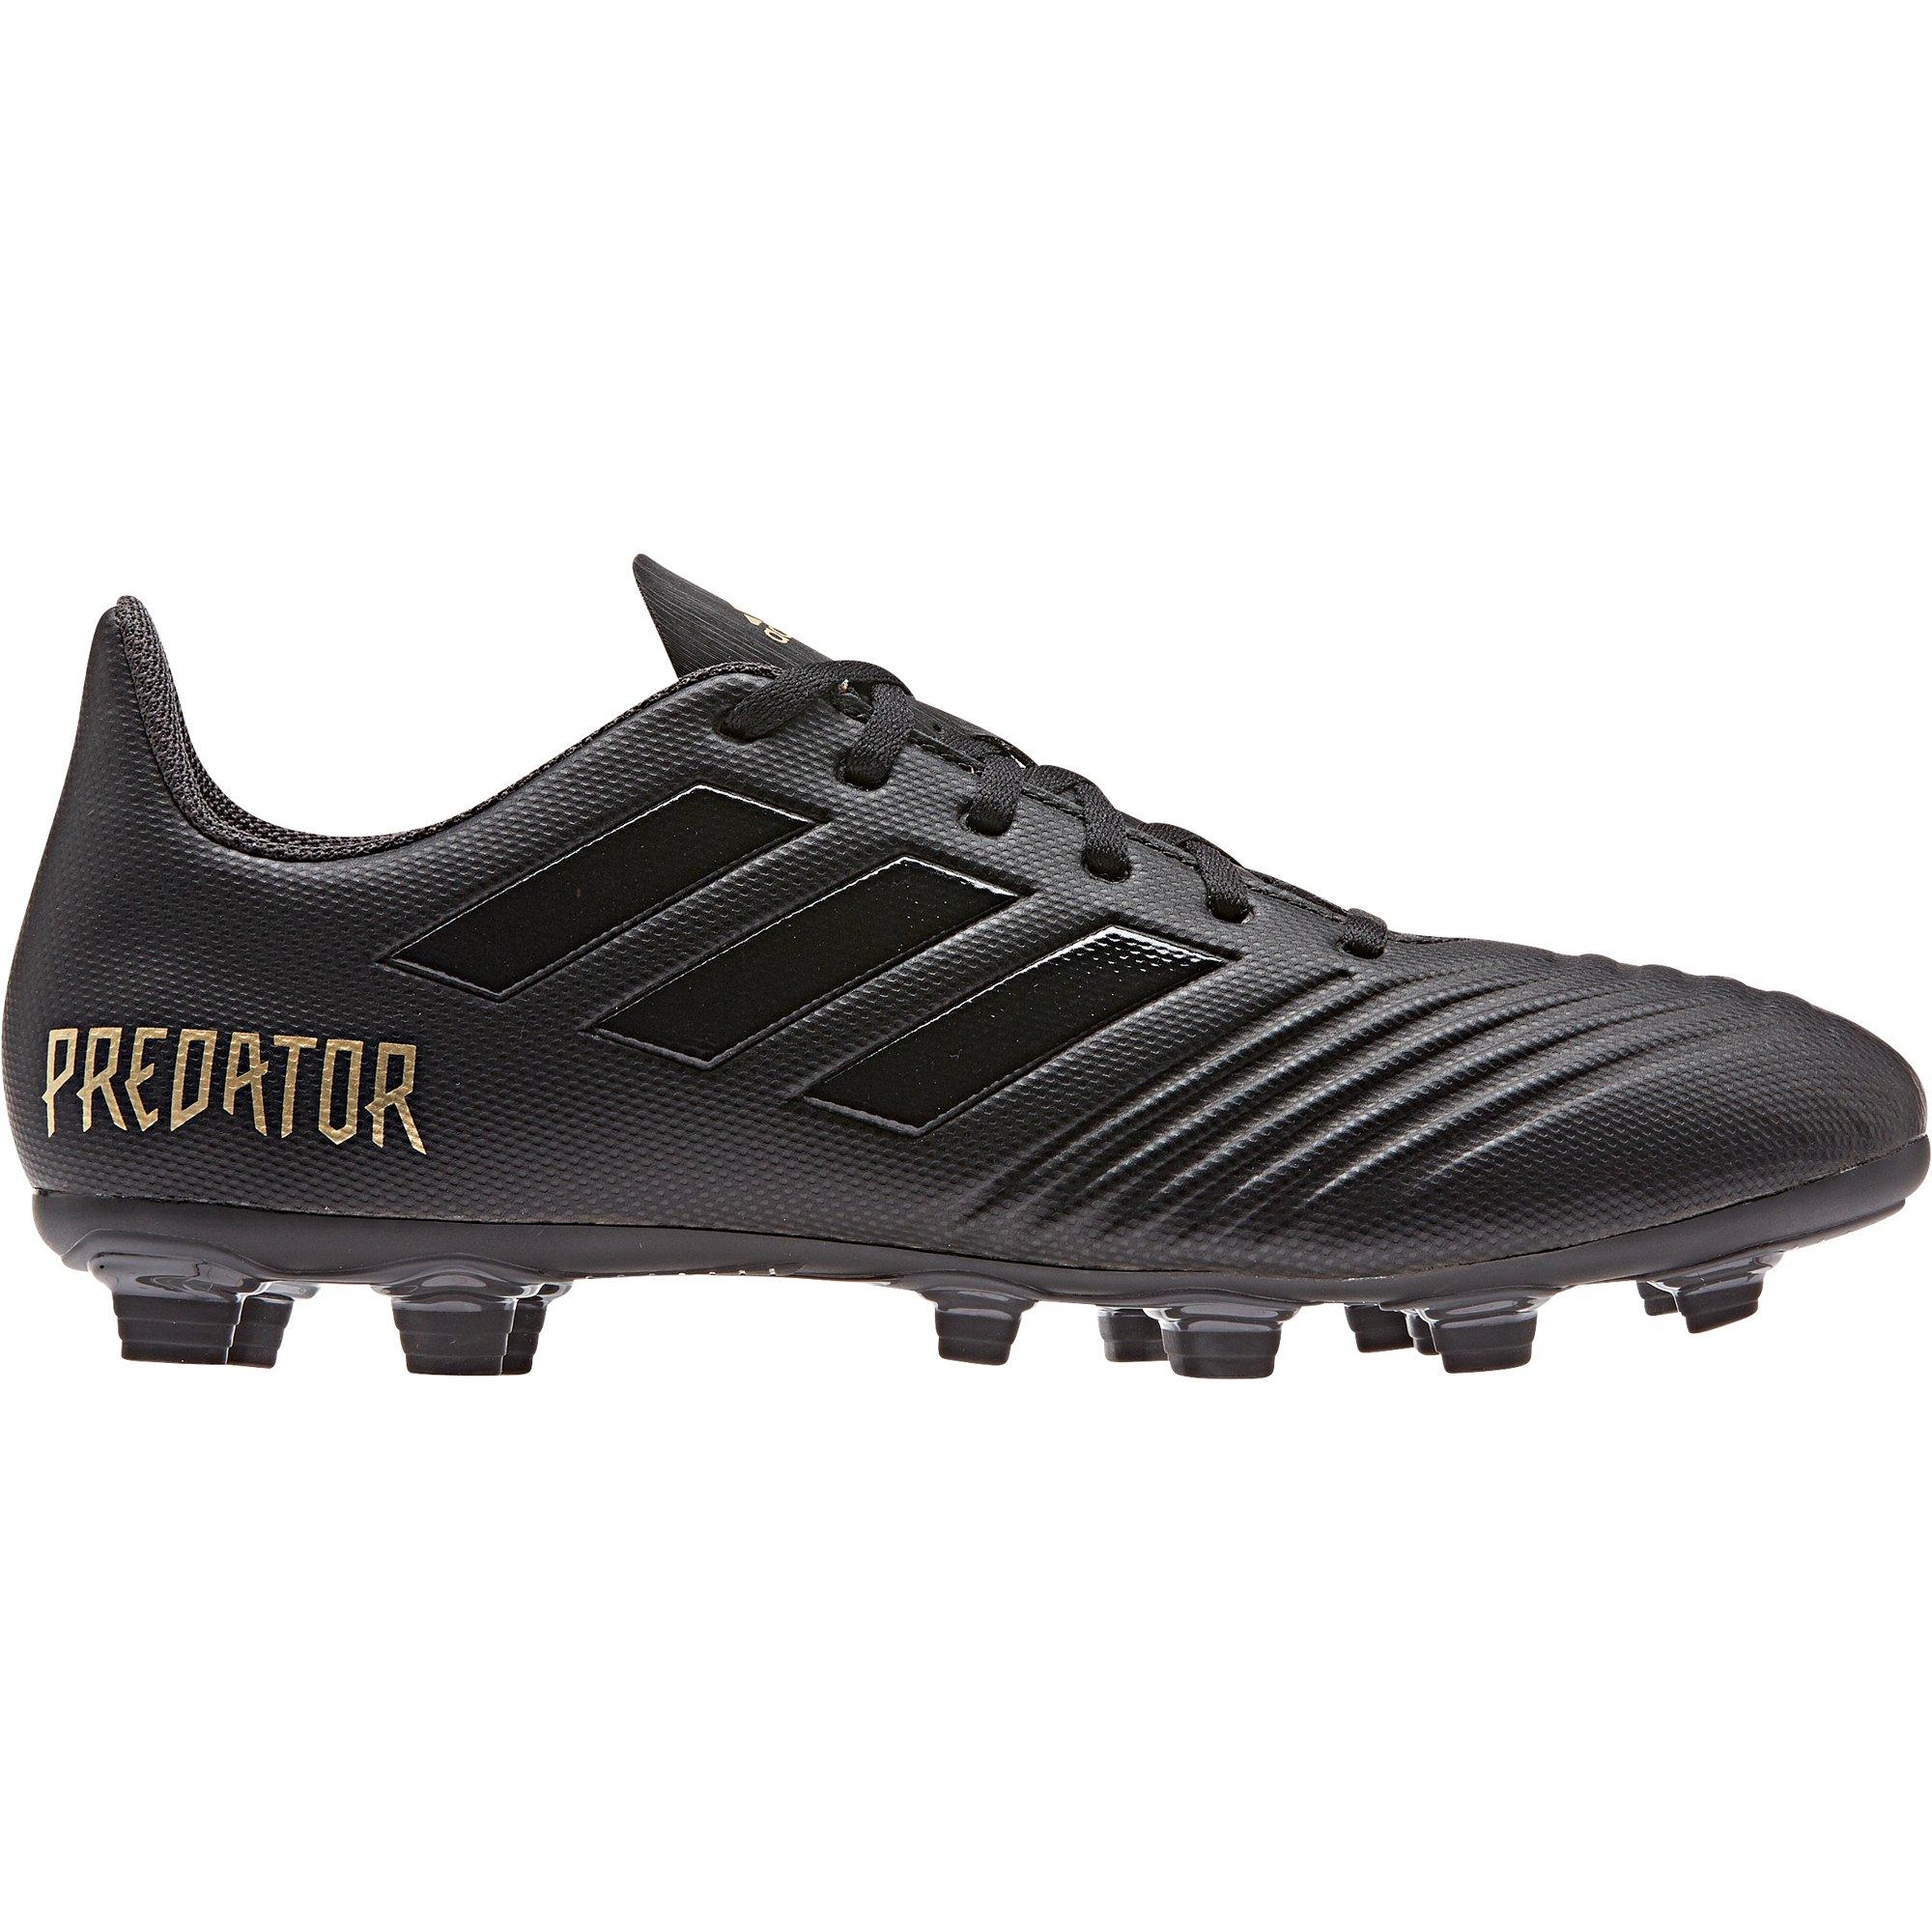 adidas black and gold soccer cleats